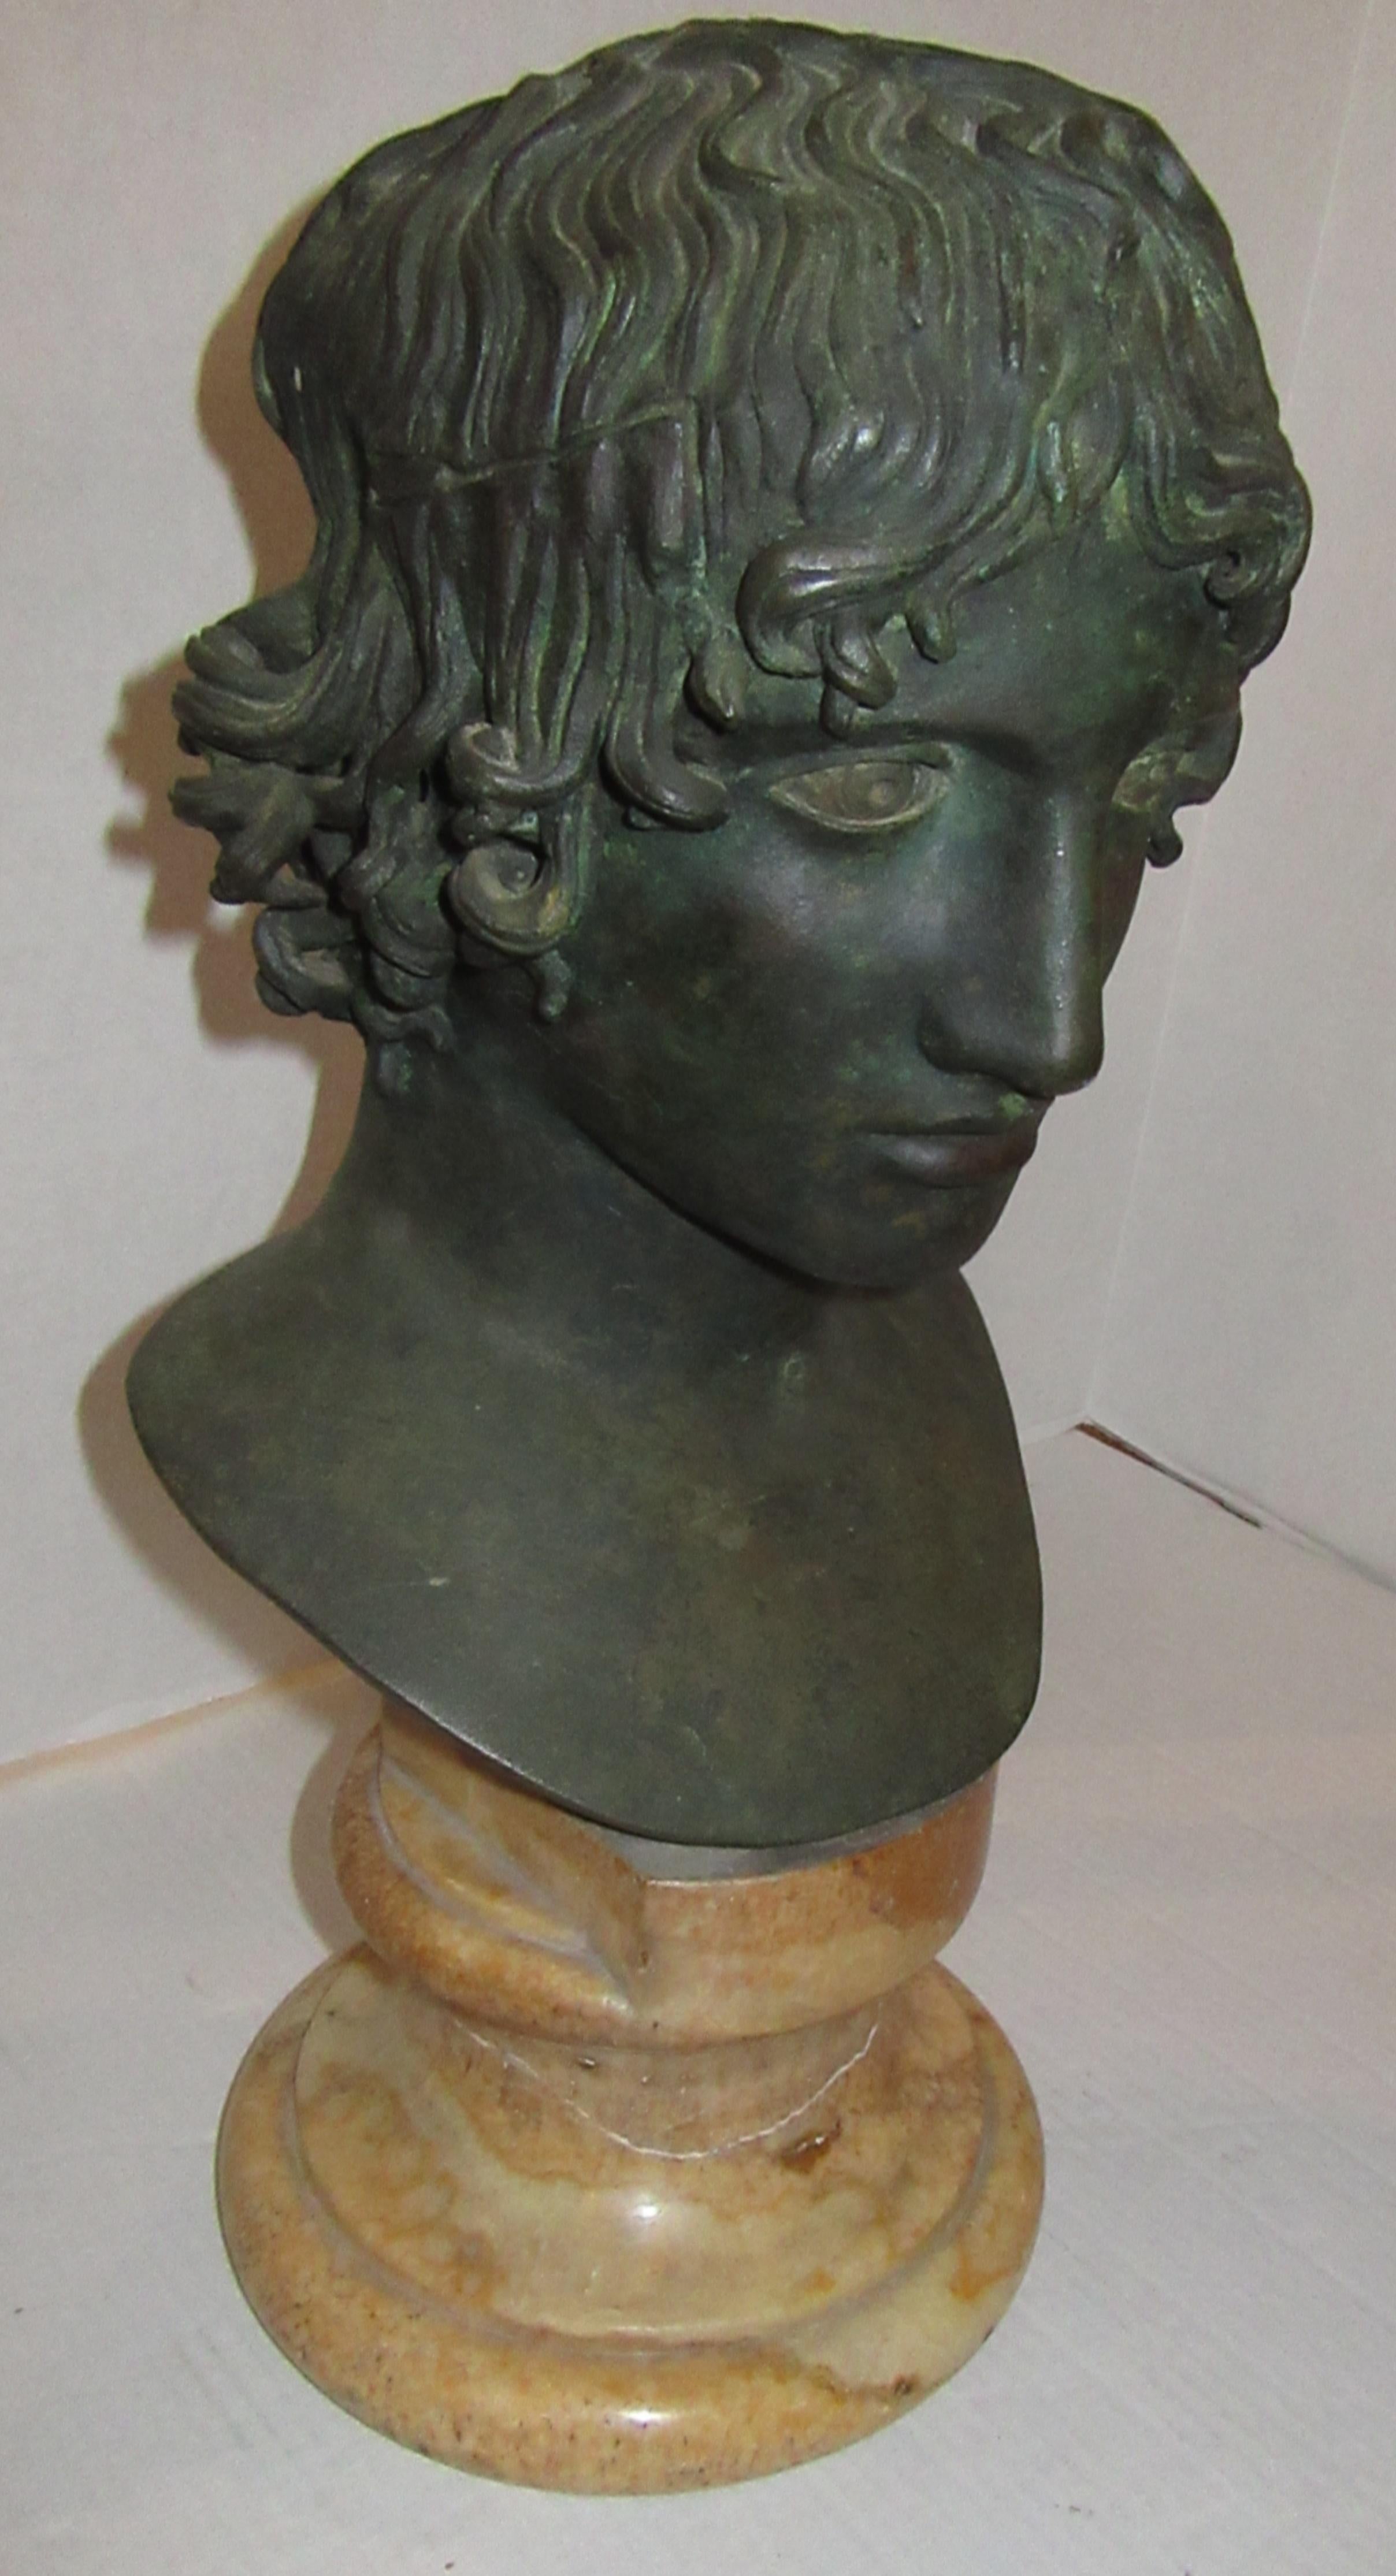 A patinated bronze bust of apollo attached to a marble base. From the collection of Lord Vincent Constantine at Cross Hall Manor.